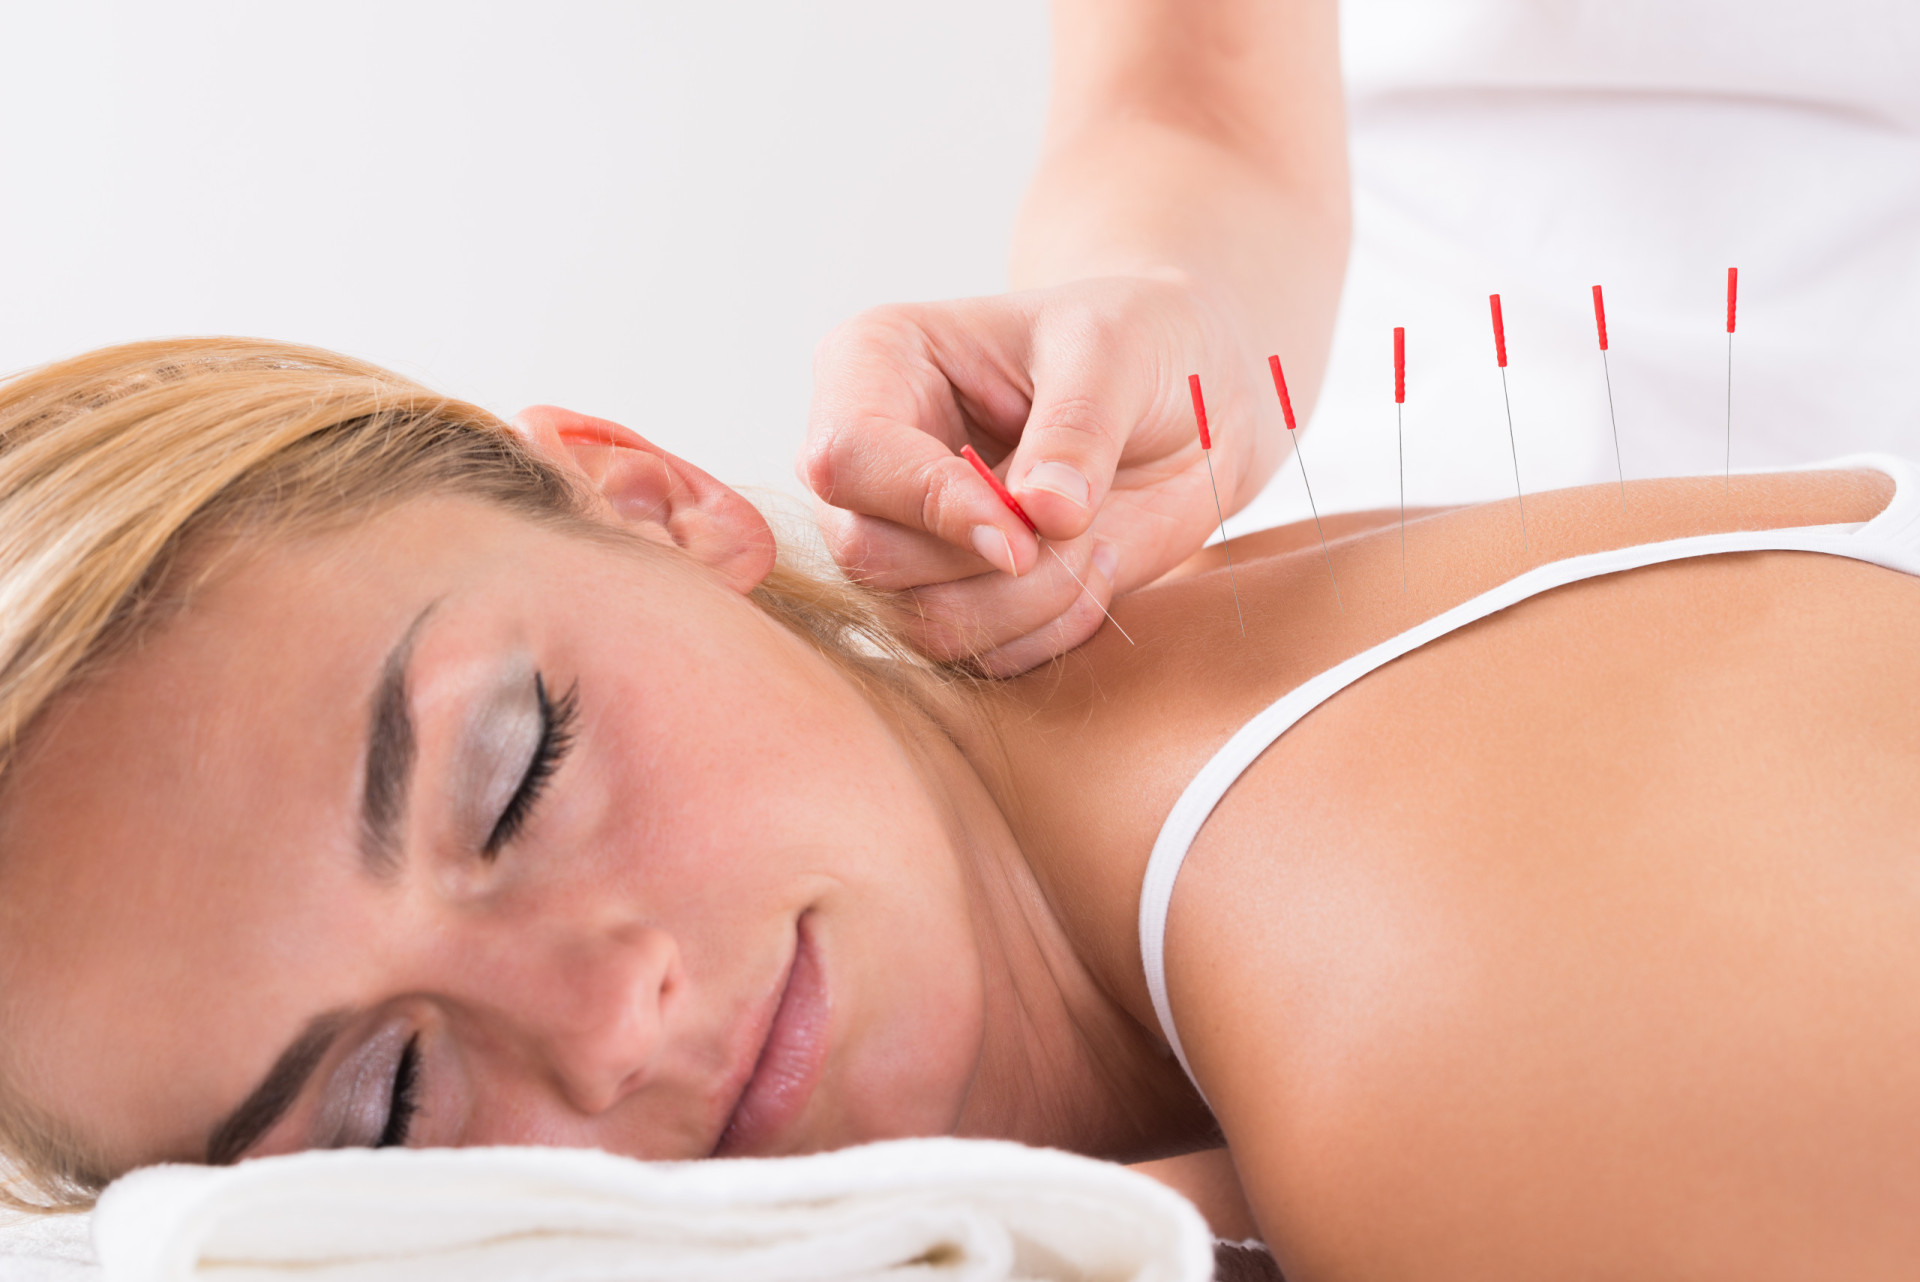 <p>Acupuncture has existed for thousands of years, and indeed it's still popular today. Even if you haven't tried this <a href="https://www.starsinsider.com/lifestyle/454889/stars-who-use-alternative-medicine" rel="noopener">alternative medical treatment</a> yourself, you probably know someone who has. After all, it's a well-known treatment method for individuals battling illness who want to relieve pain and heal themselves without resorting to Western medicine.</p> <p>Most people already know that acupuncture involves the use of thin needles being inserted into different areas of the body, and that they address various health concerns. But there's much more to this treatment than piercing needles in the body.</p> <p>Check out the following gallery for everything you need to know about acupuncture.</p><p>You may also like:<a href="https://www.starsinsider.com/n/125741?utm_source=msn.com&utm_medium=display&utm_campaign=referral_description&utm_content=509810en-us"> The most bizarre objects that fell to Earth </a></p>